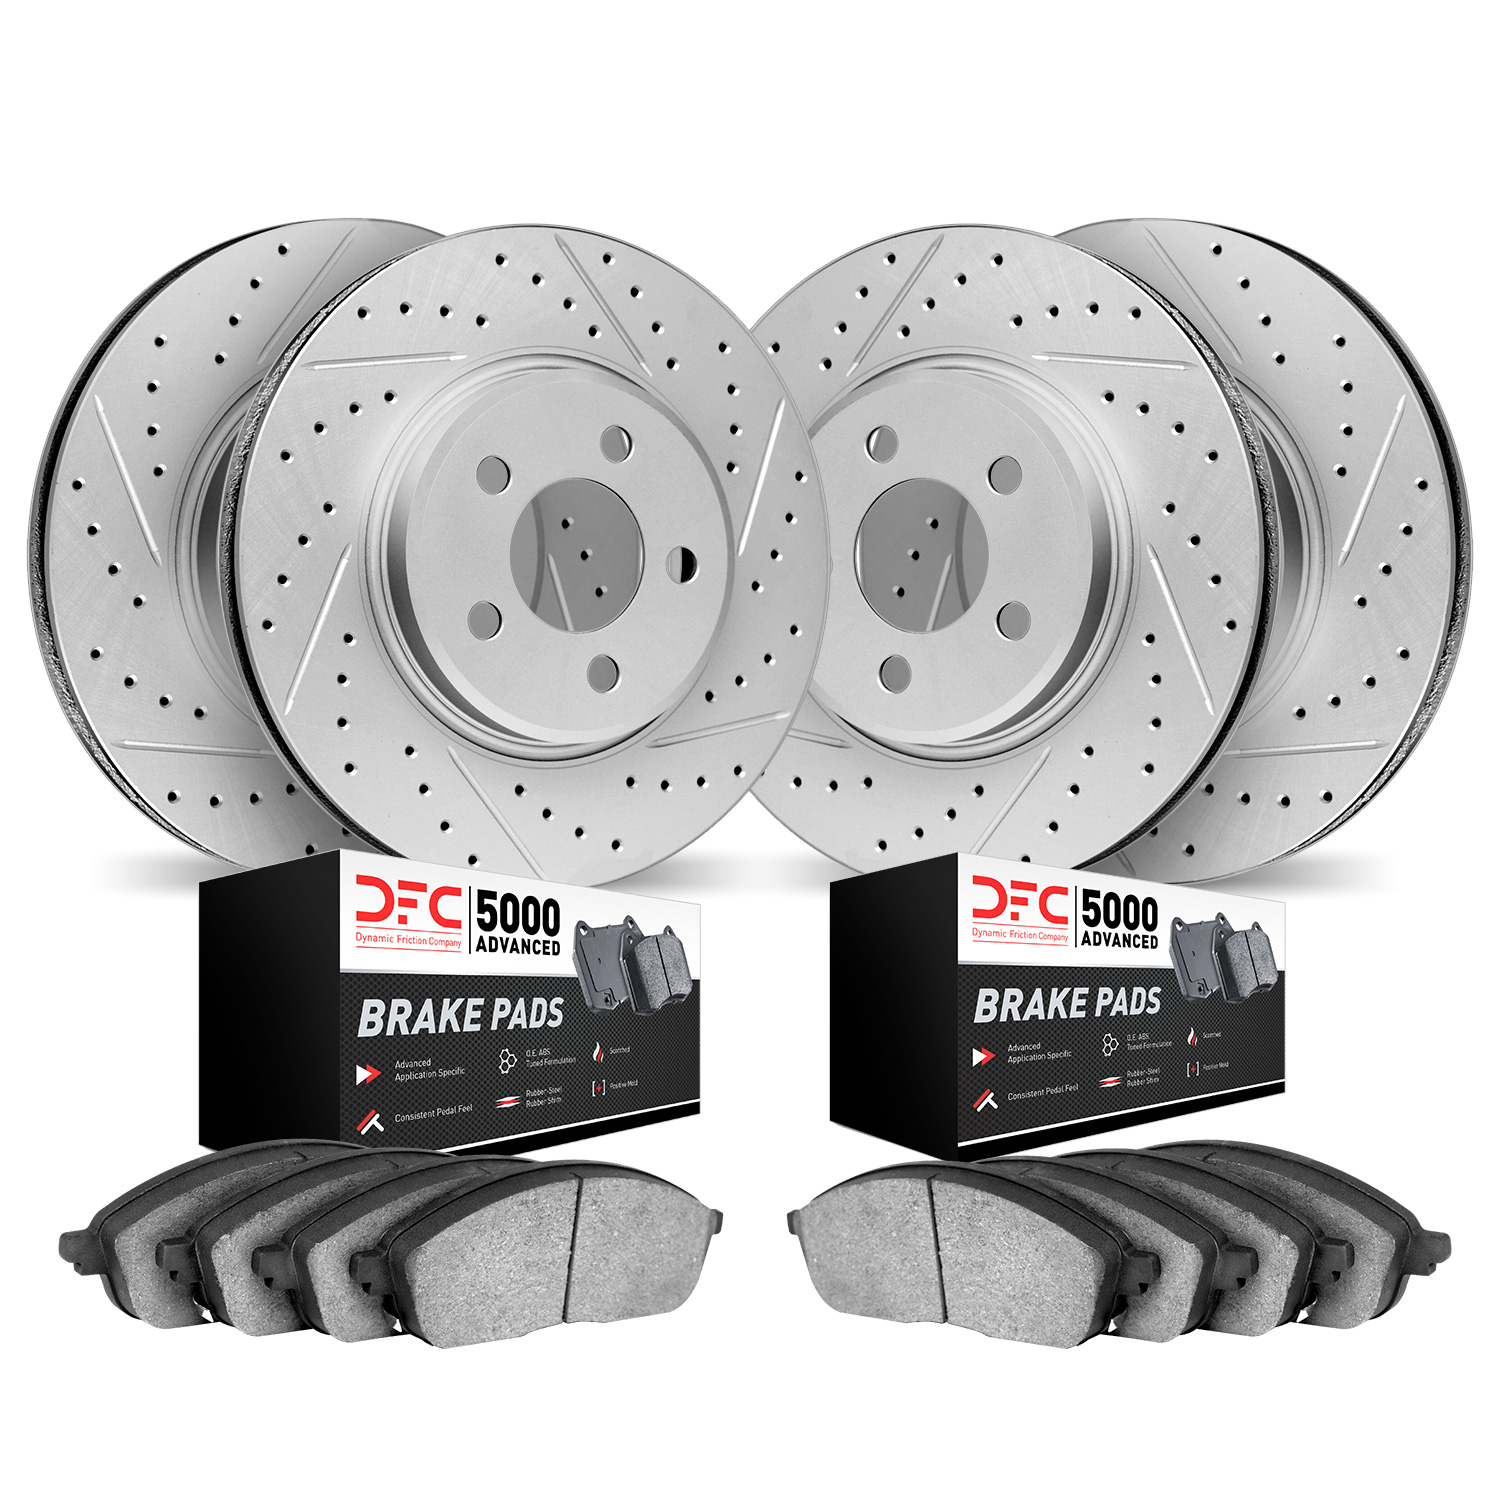 2504-48006 Geoperformance Drilled/Slotted Rotors w/5000 Advanced Brake Pads Kit, 1997-2005 GM, Position: Front and Rear